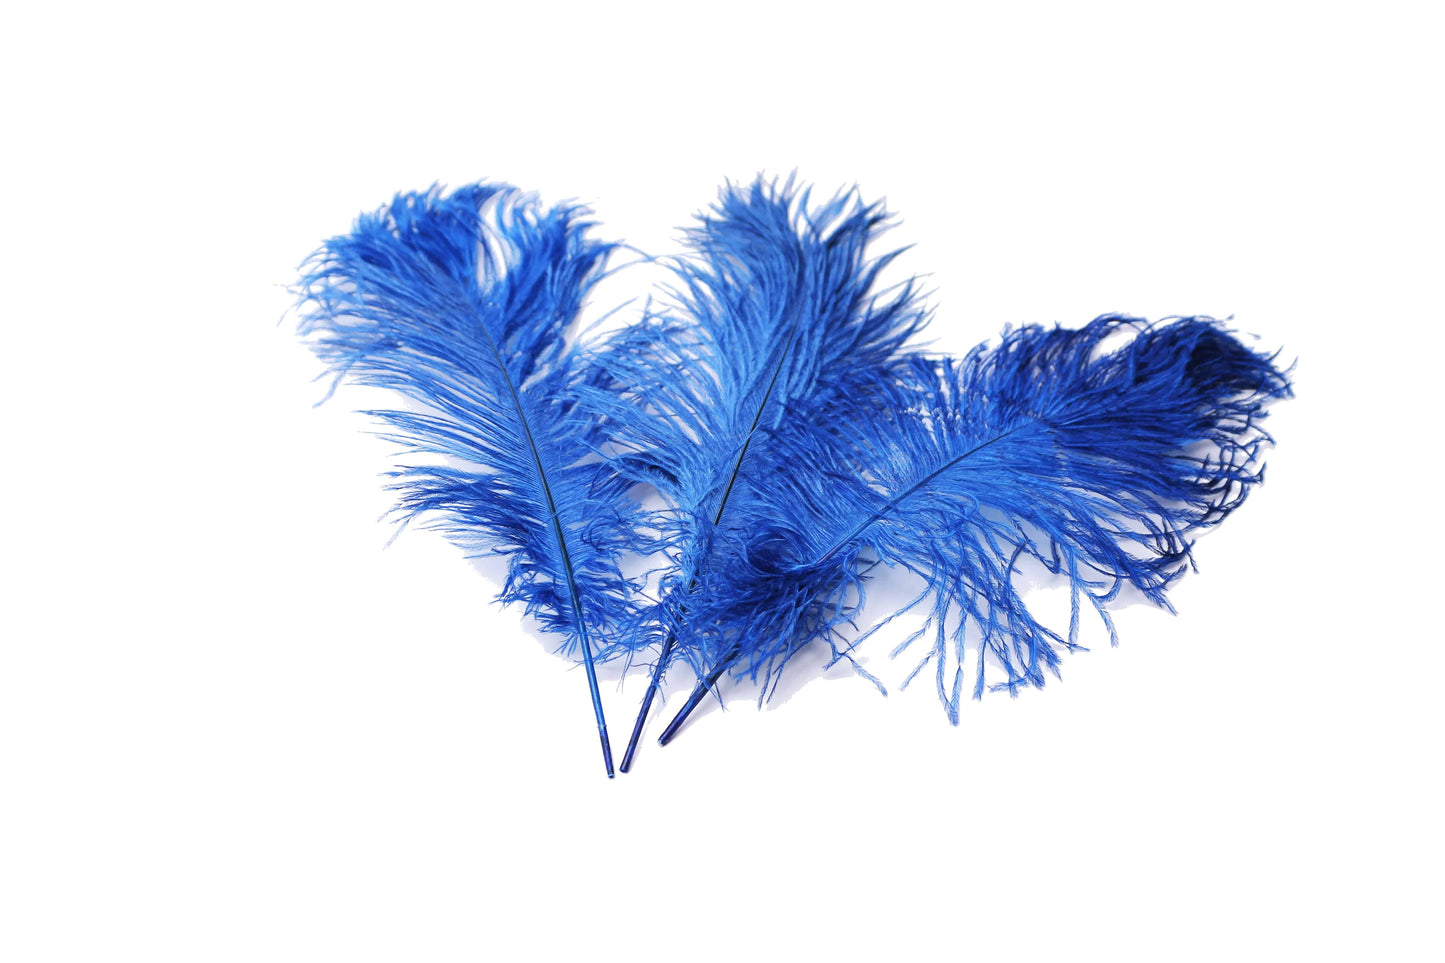 Premium Photo  A photo of a stunning arrangement of blue feathers